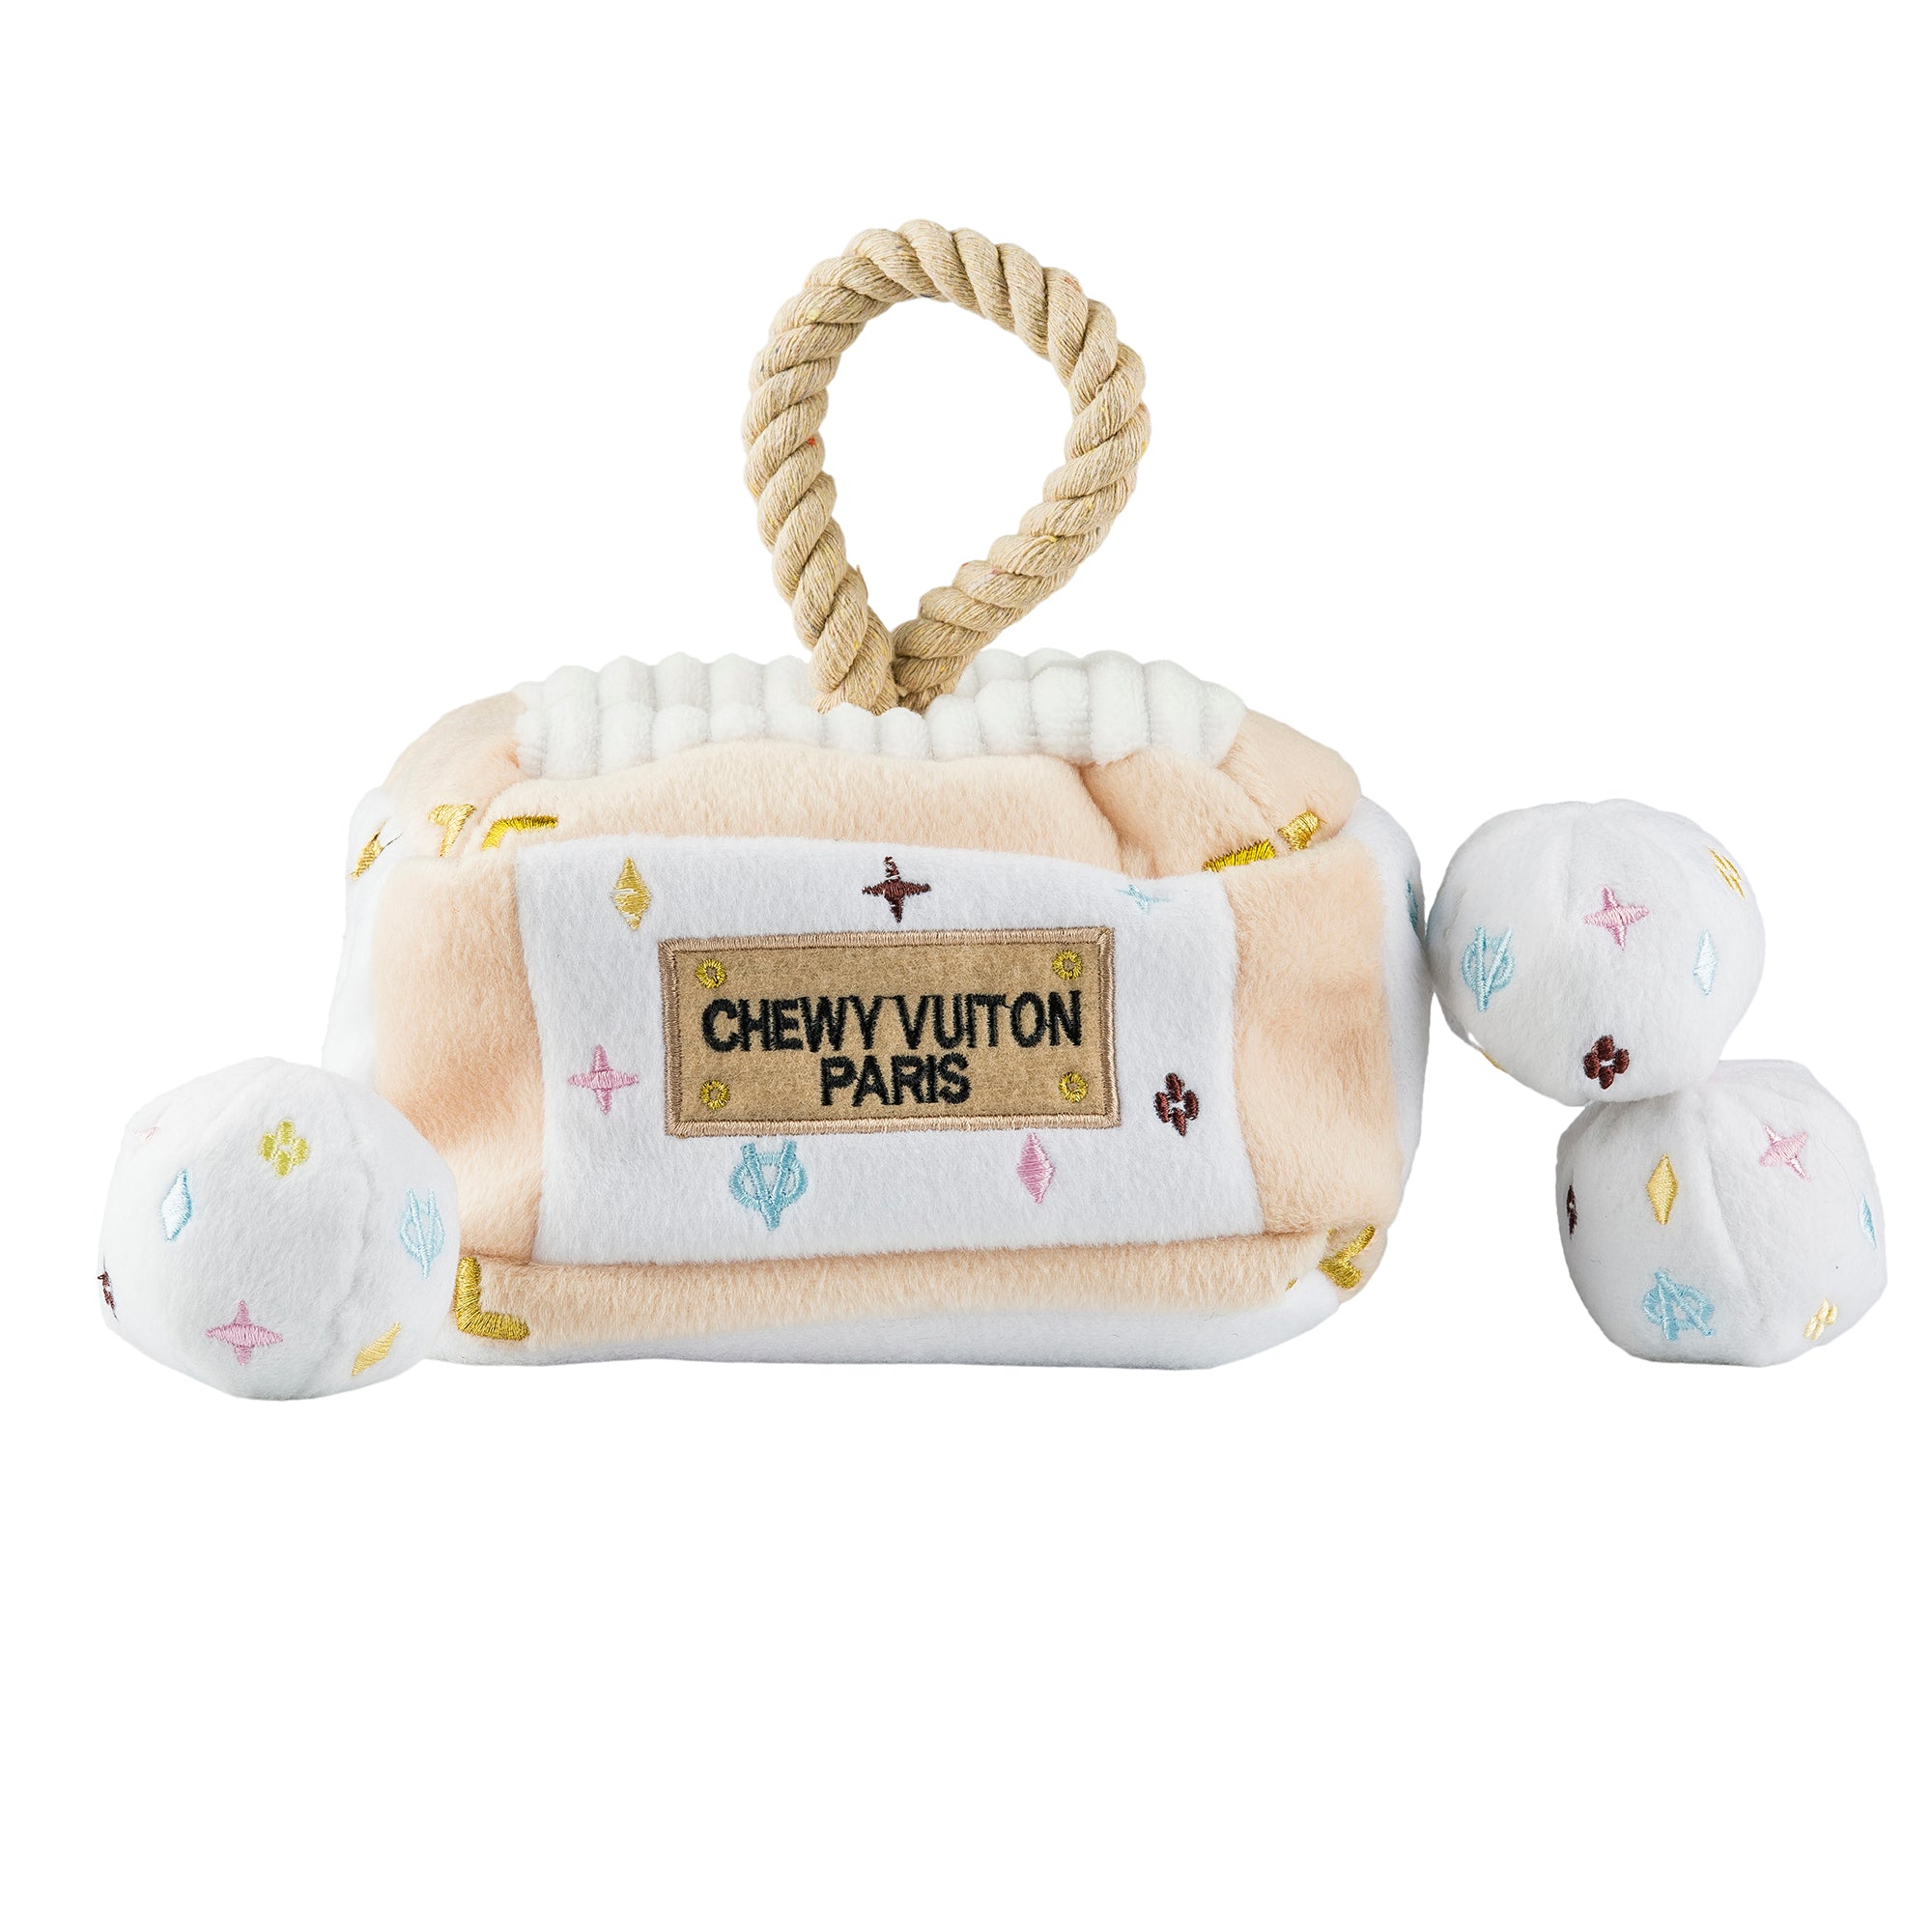 Chewy Vuiton Interactive Trunk Toy, Chewy Vuiton, Designer Dog Toy, Haute  Diggity Dog Toy, Plush Bone Toy, Designer Bone Toy - Tails in the City